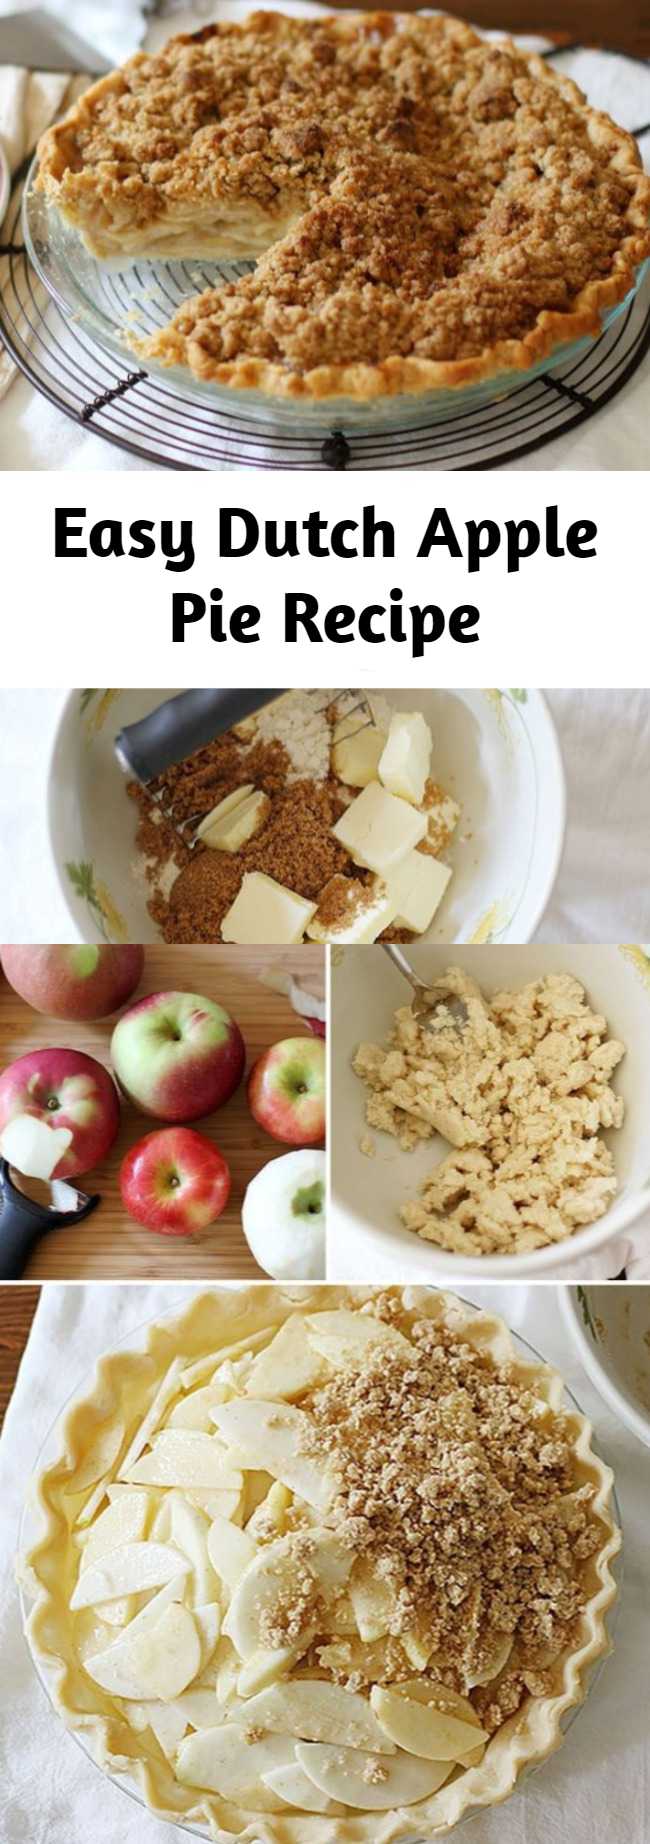 Easy Dutch Apple Pie Recipe - The difference between classic apple pie and Dutch apple pie is all in the delicious crumb topping. Instead of a pie-crust, Dutch apple pie features a generous blanket of sweet streusel crumbs made with a simple mixture of sugar, butter and flour–sprinkled over a tender spiced apple filling and what you get is a humble apple pie elevated to a new level of delicious.